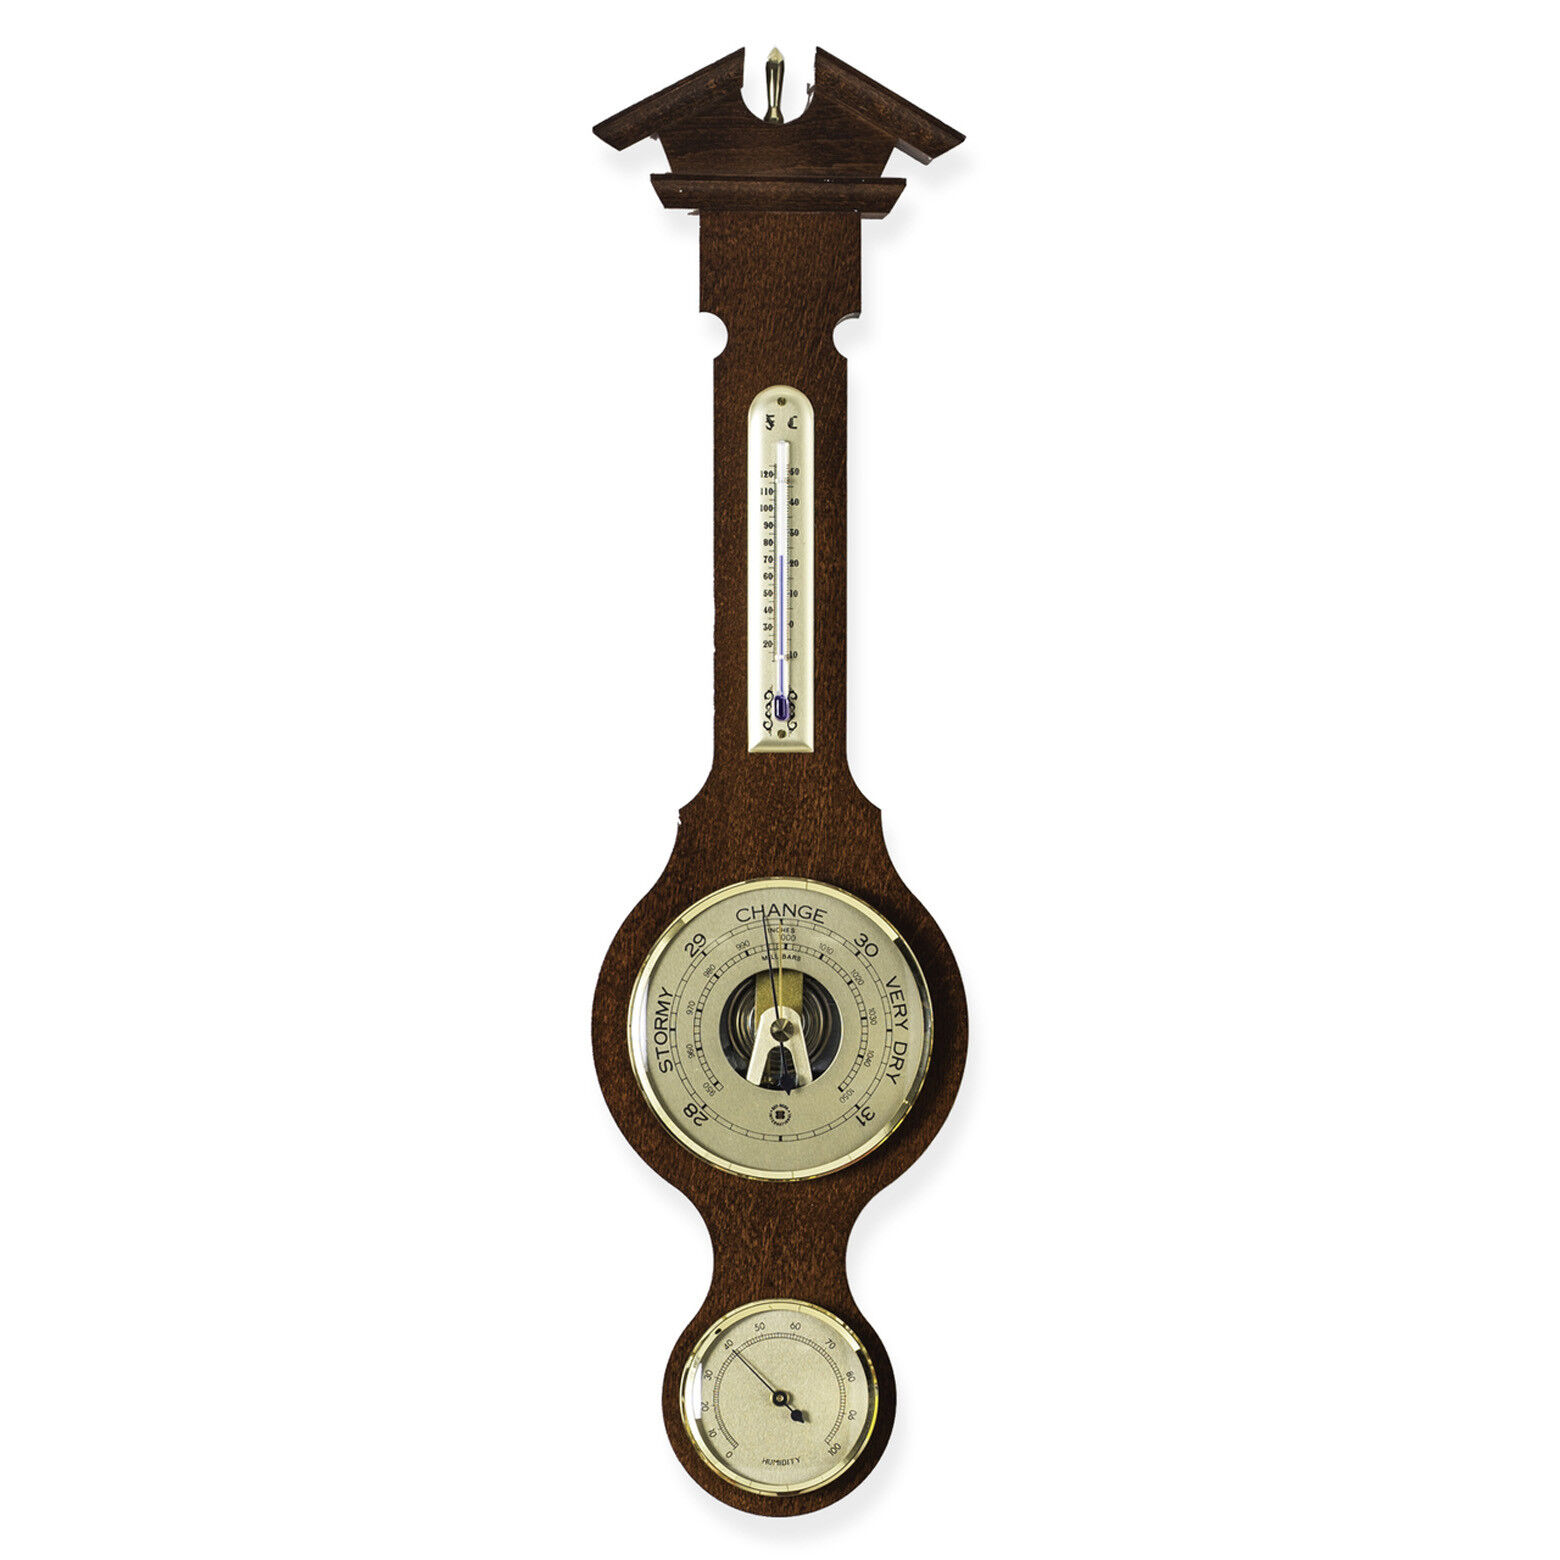 WEATHER STATIONS - GREENWICH BAROMETER, THERMOMETER & HYGROMETER WEATHER STATION